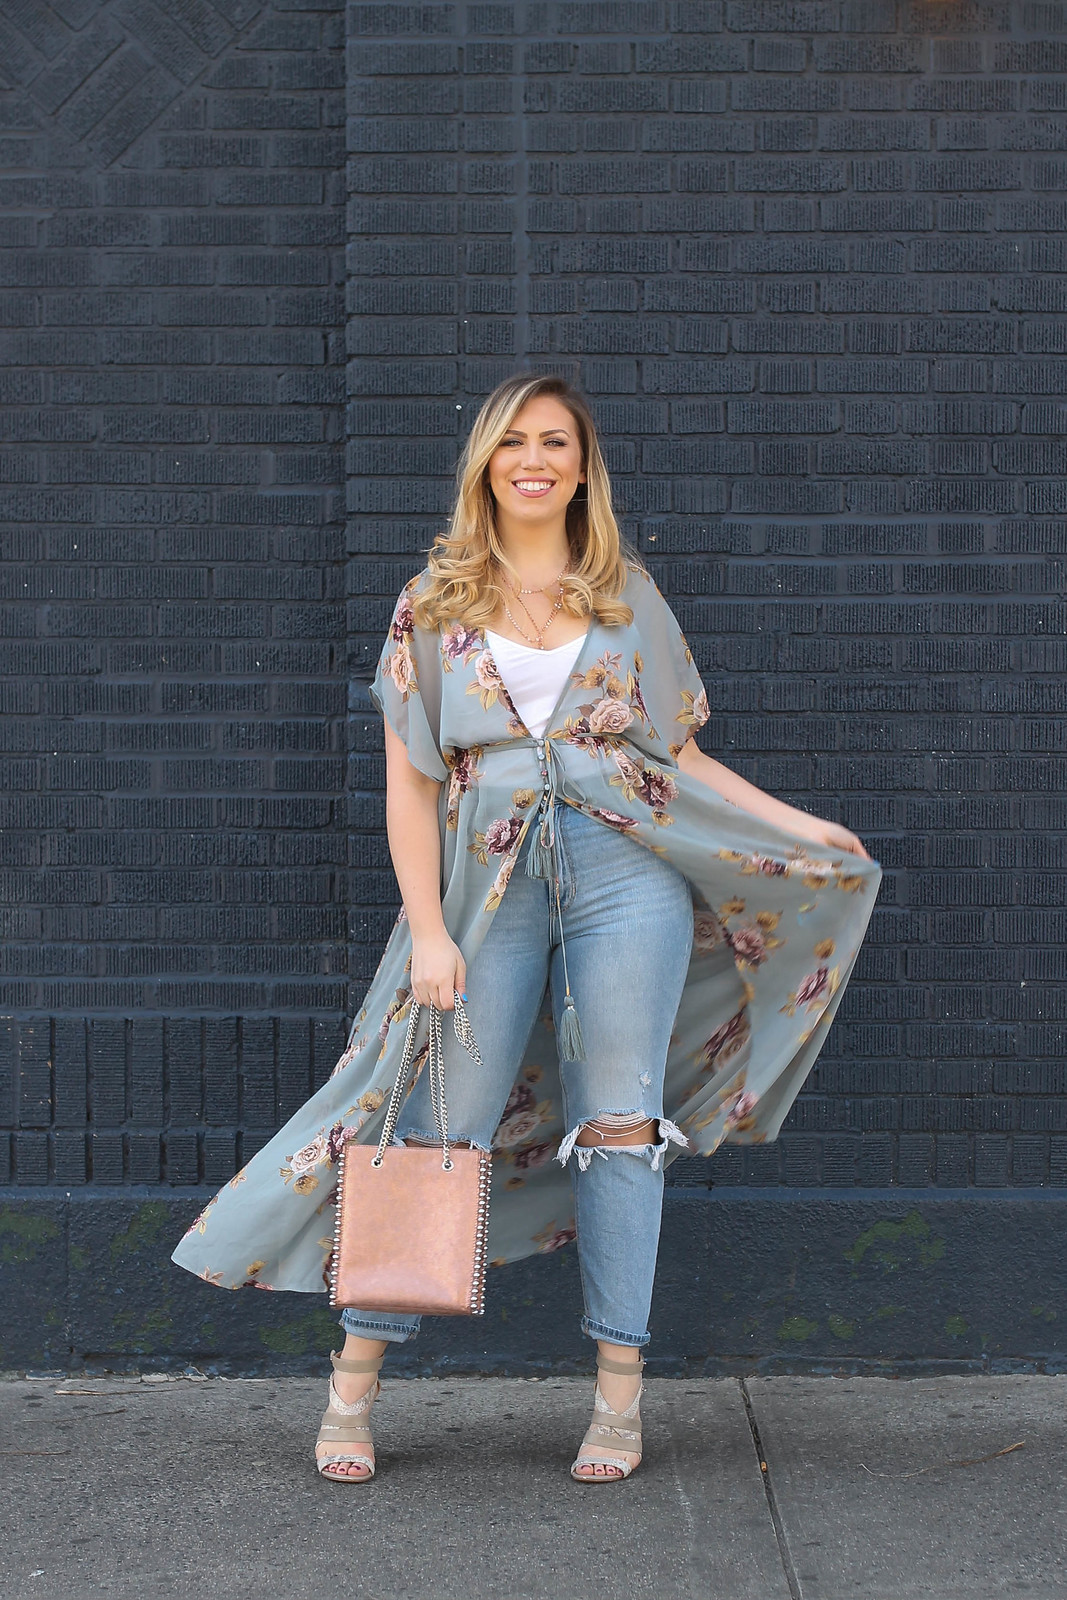 Floral Duster Sheer Kimono Outfit Mom Jeans Rose Gold Studded Zara Bag Spring Feminine Outfit Jackie Giardina